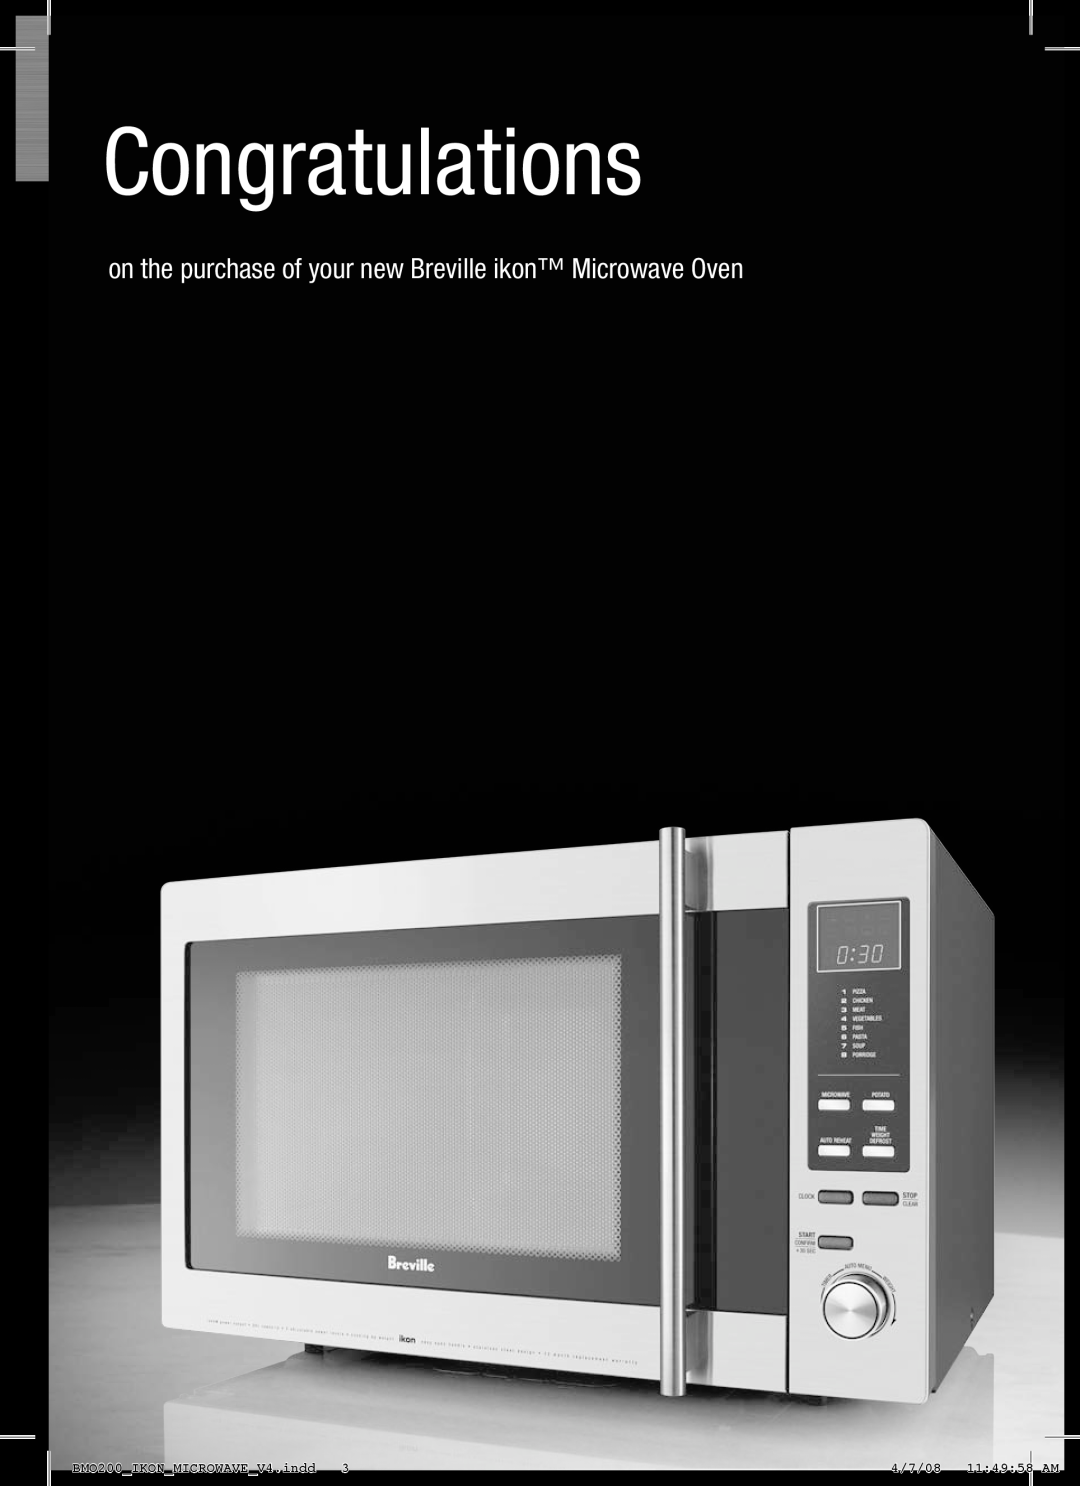 Breville BM0200 Congratulations, on the purchase of your new Breville ikon Microwave Oven, BMO200IKONMICROWAVEV4.indd 